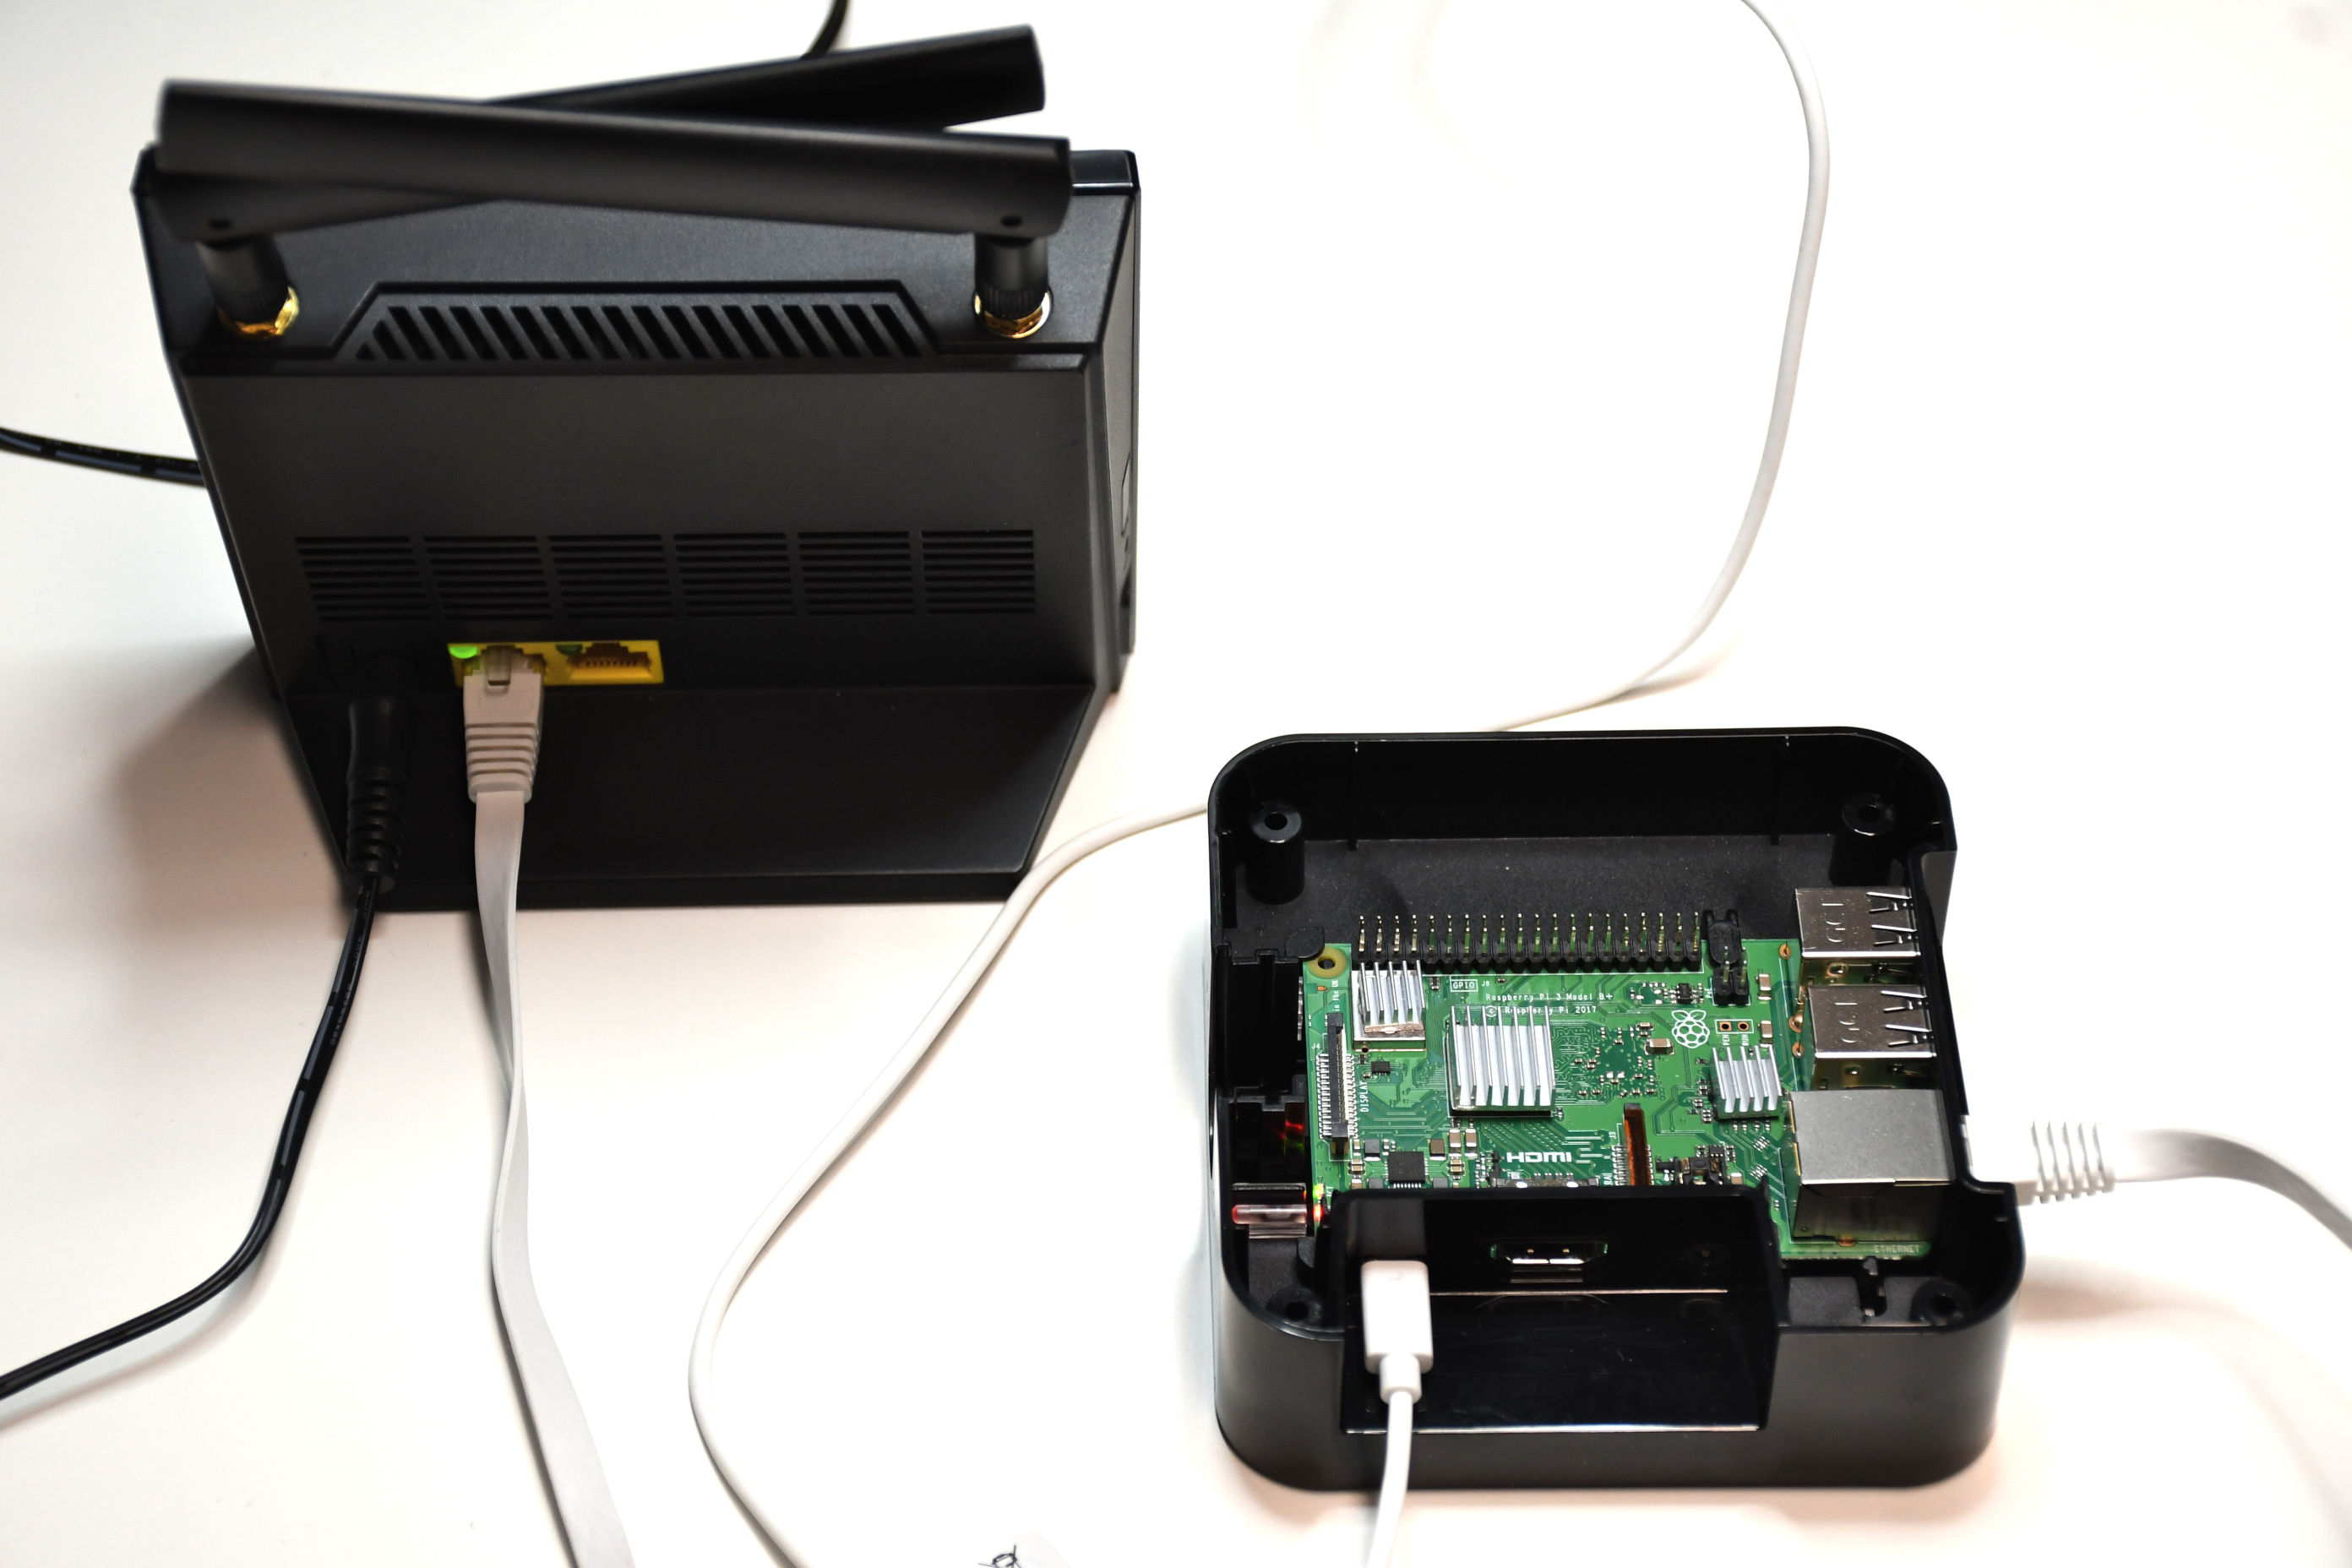 An example photo of a Raspberry Pi with SD card inserted, USB power cable connected and the Ethernet cable connected to a 4G modem